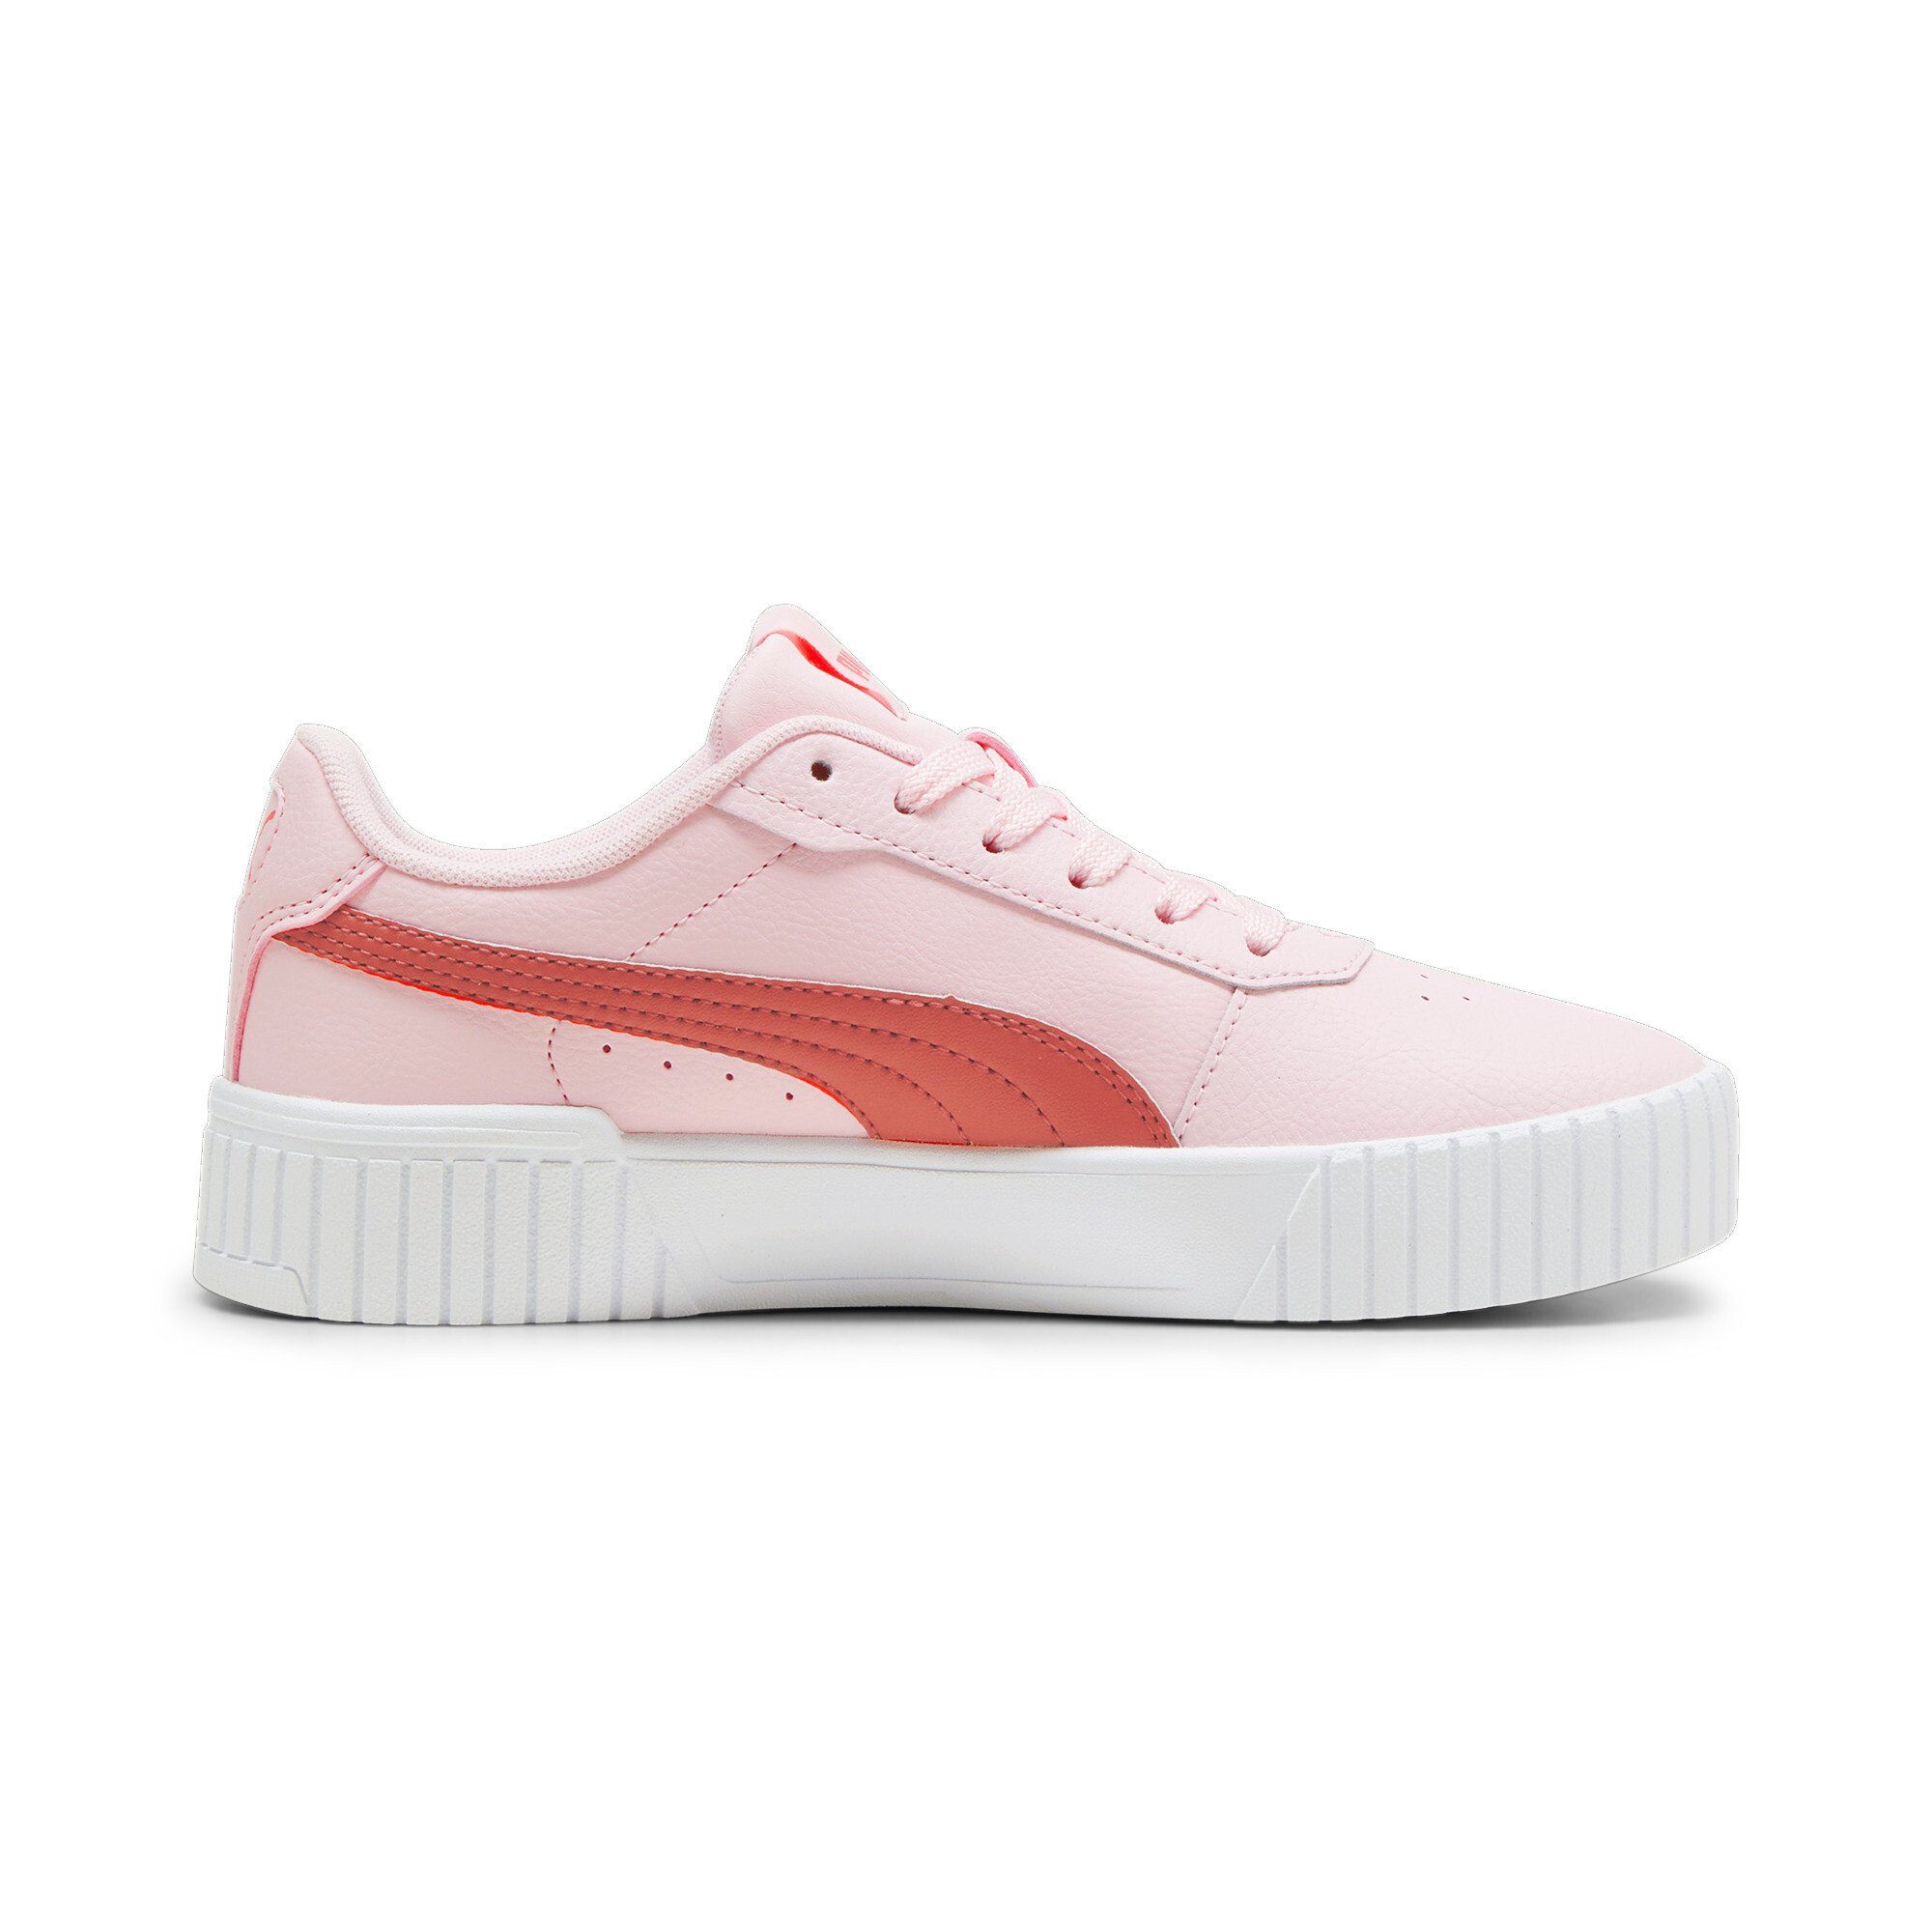 PUMA Carina Pink Red Active Whisp Of Sneakers White Jugendliche Sneaker 2.0